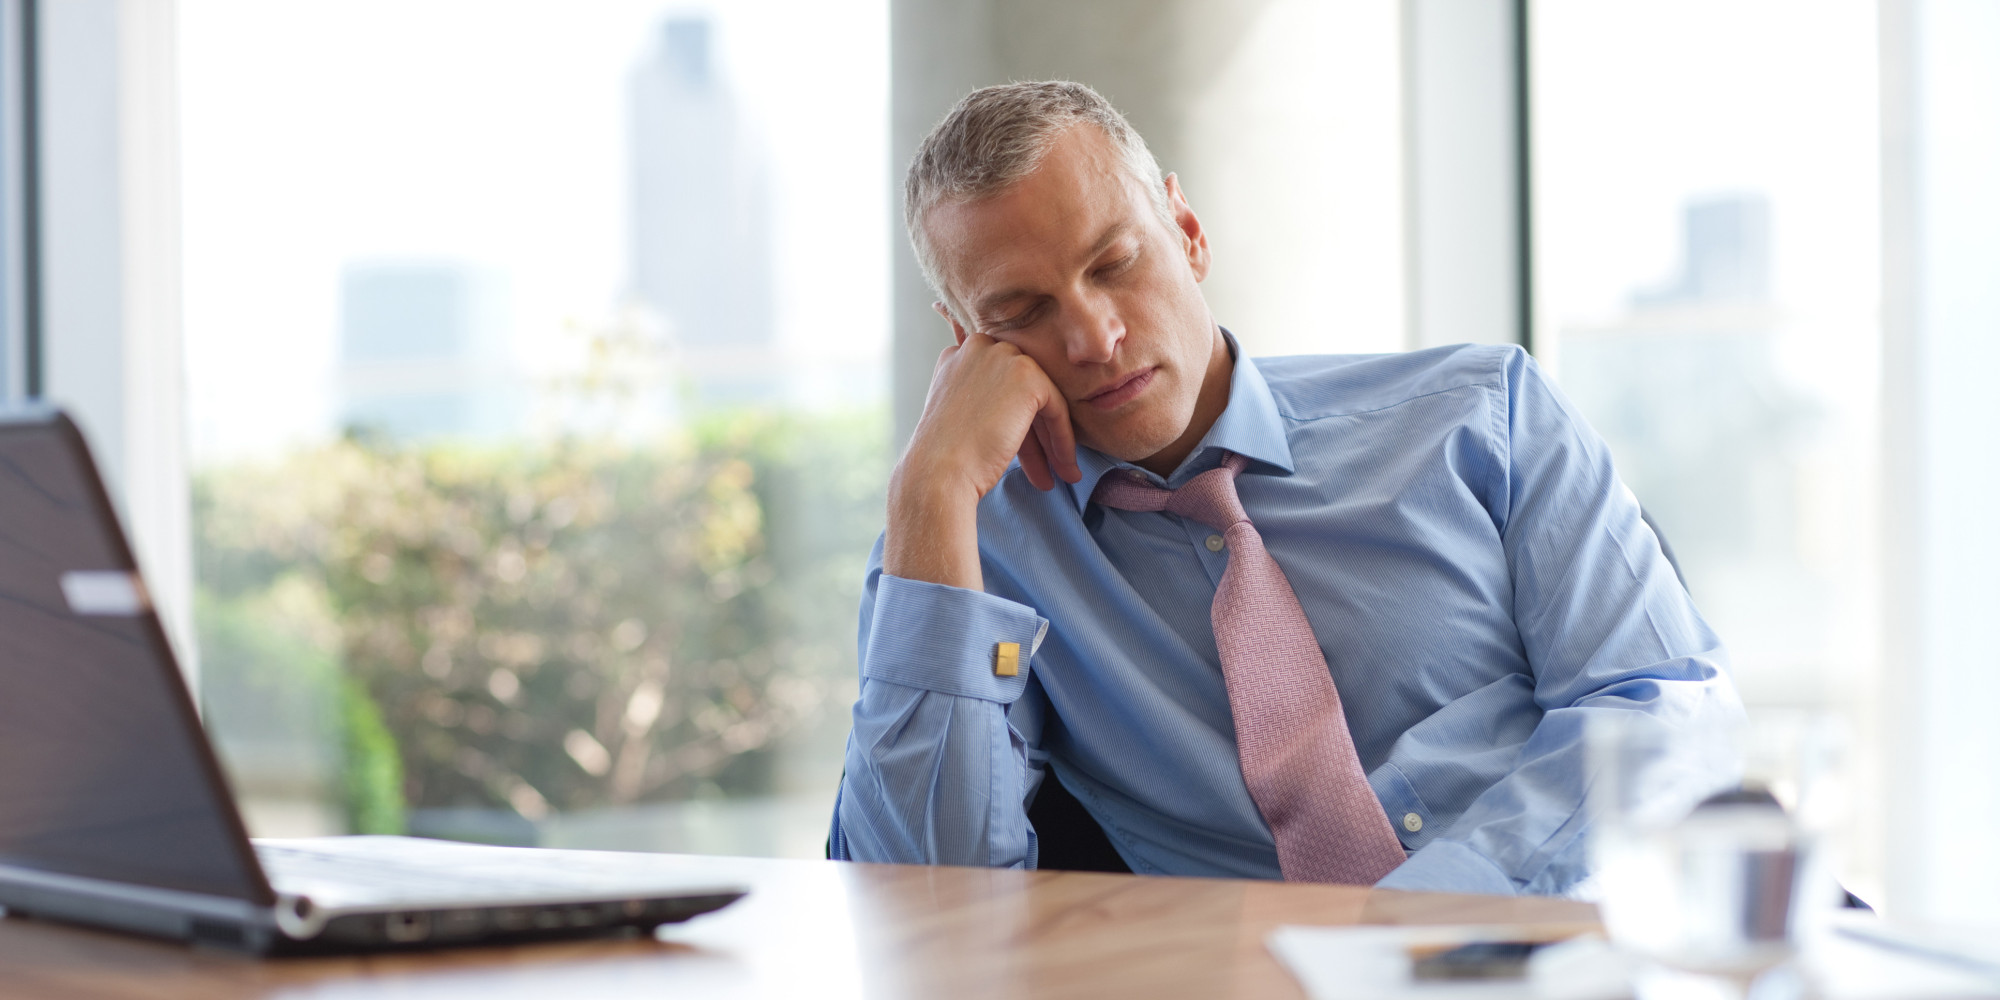 Has the Time Change Left You Sluggish and Tired?